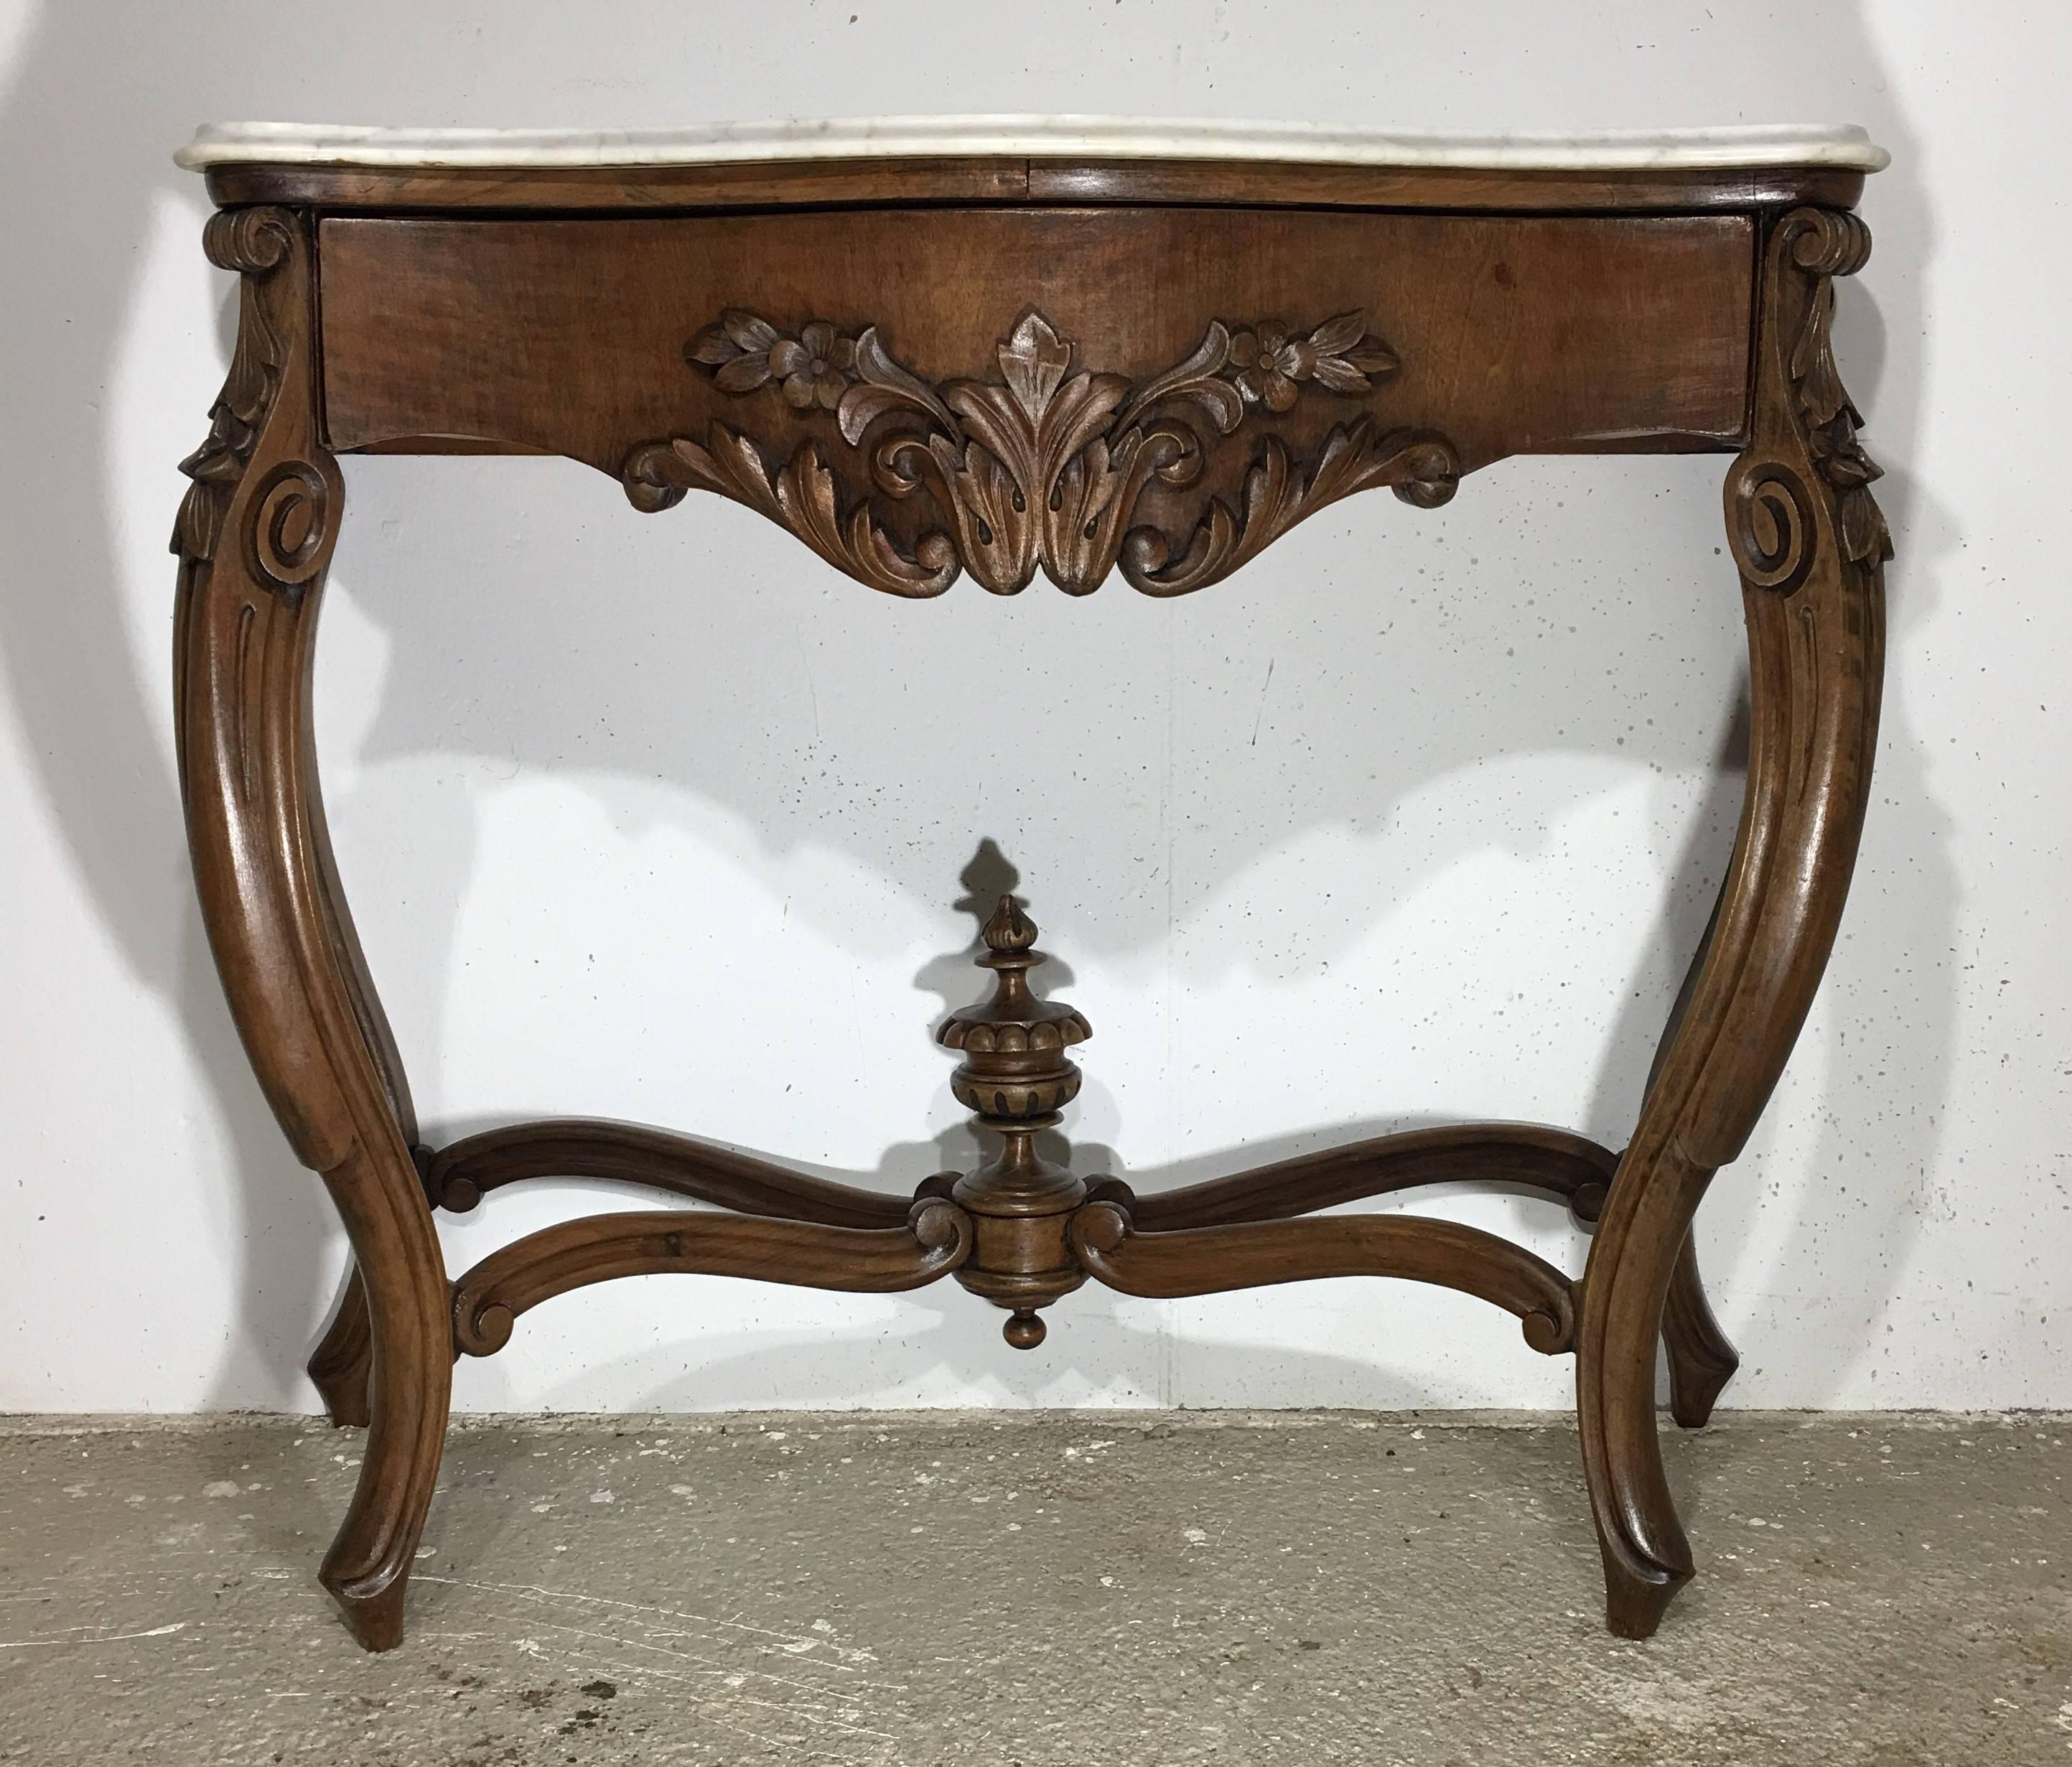 19th French Regency Carved Walnut Console Table with drawer & Marble top 

19th century French Regence style beautifully carved with leaves walnut console. White cream marble top with front drawer, over hand-carved frieze supported by four cabriole